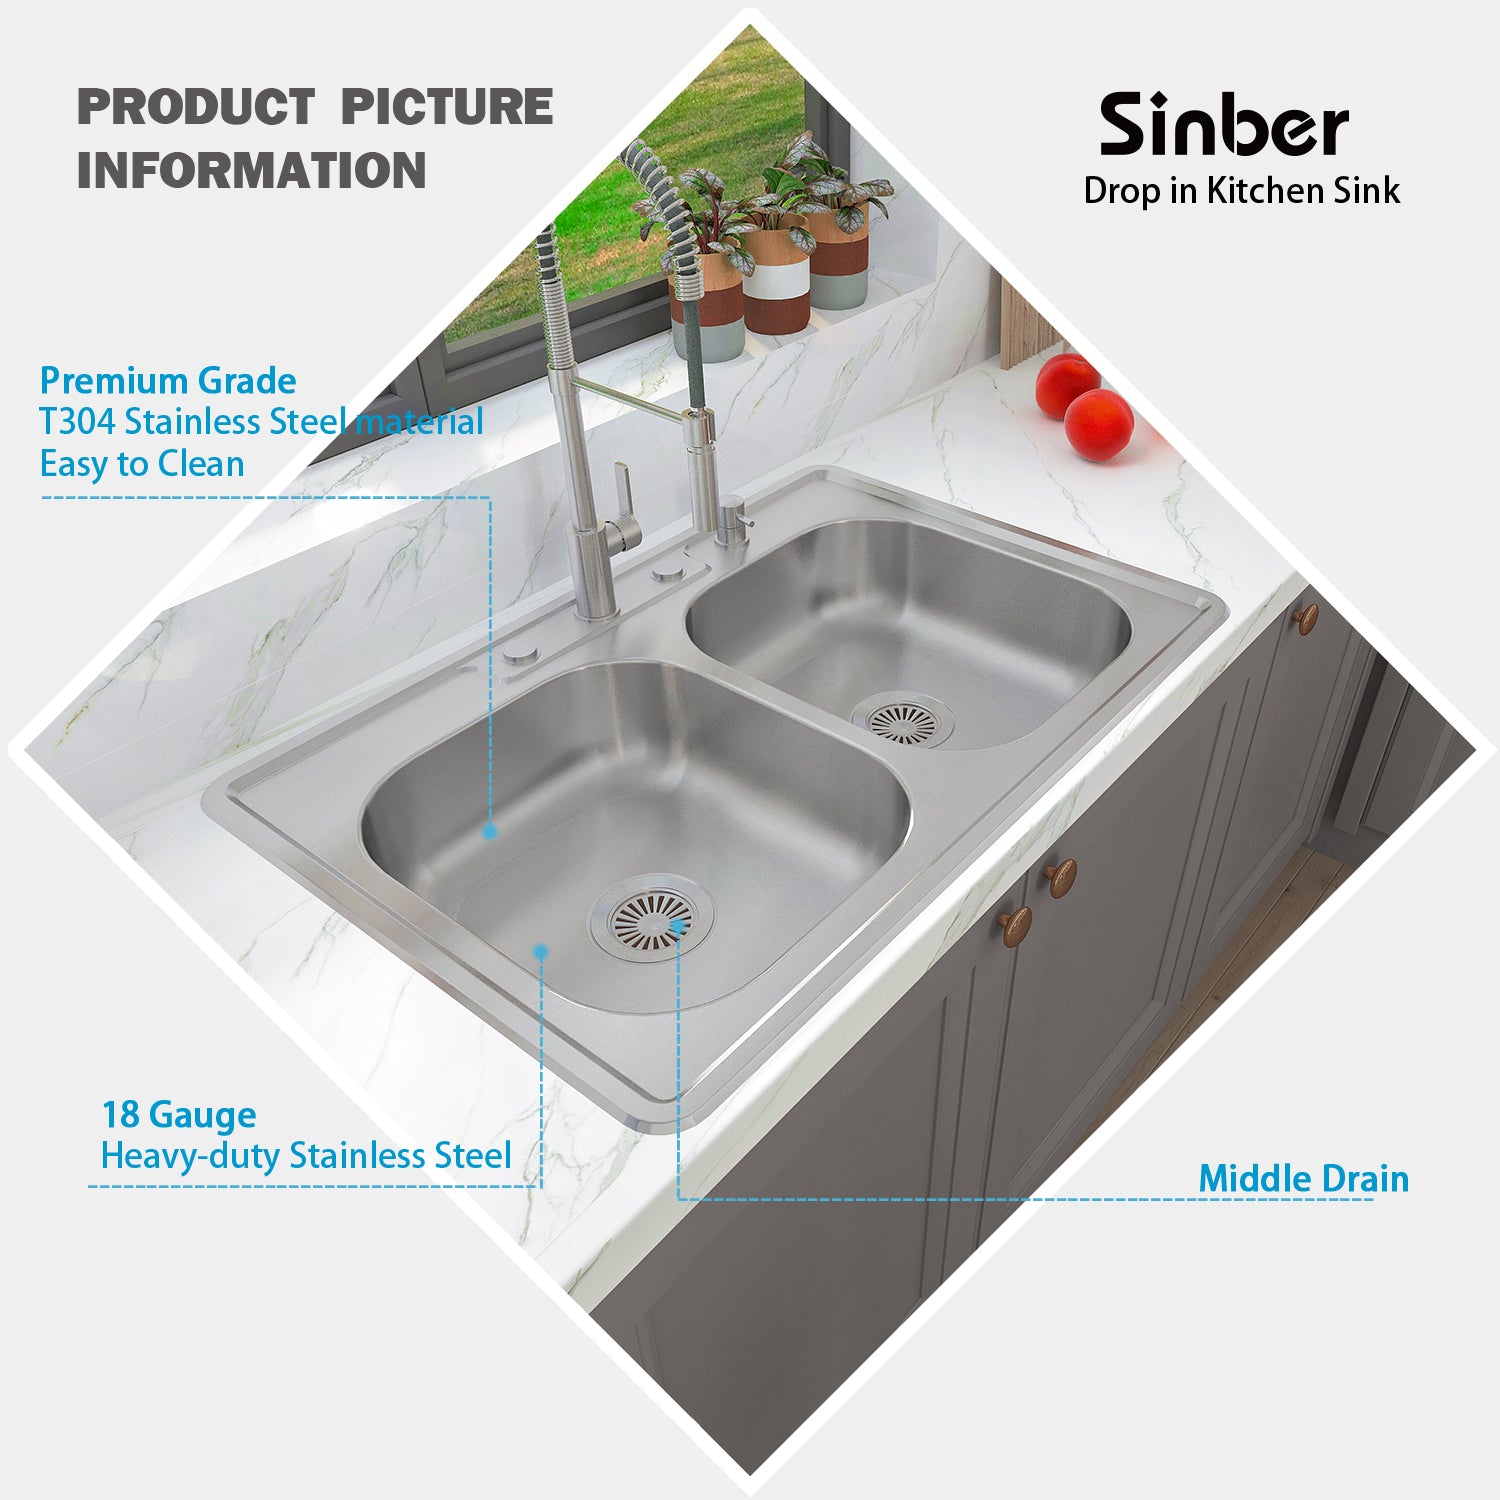 Sinber 33" x 22" x 5.5" Drop In Double Bowl Kitchen Sink with 18 Gauge 304 Stainless Steel Satin Finish MT3322D-ADA (Sink Only)